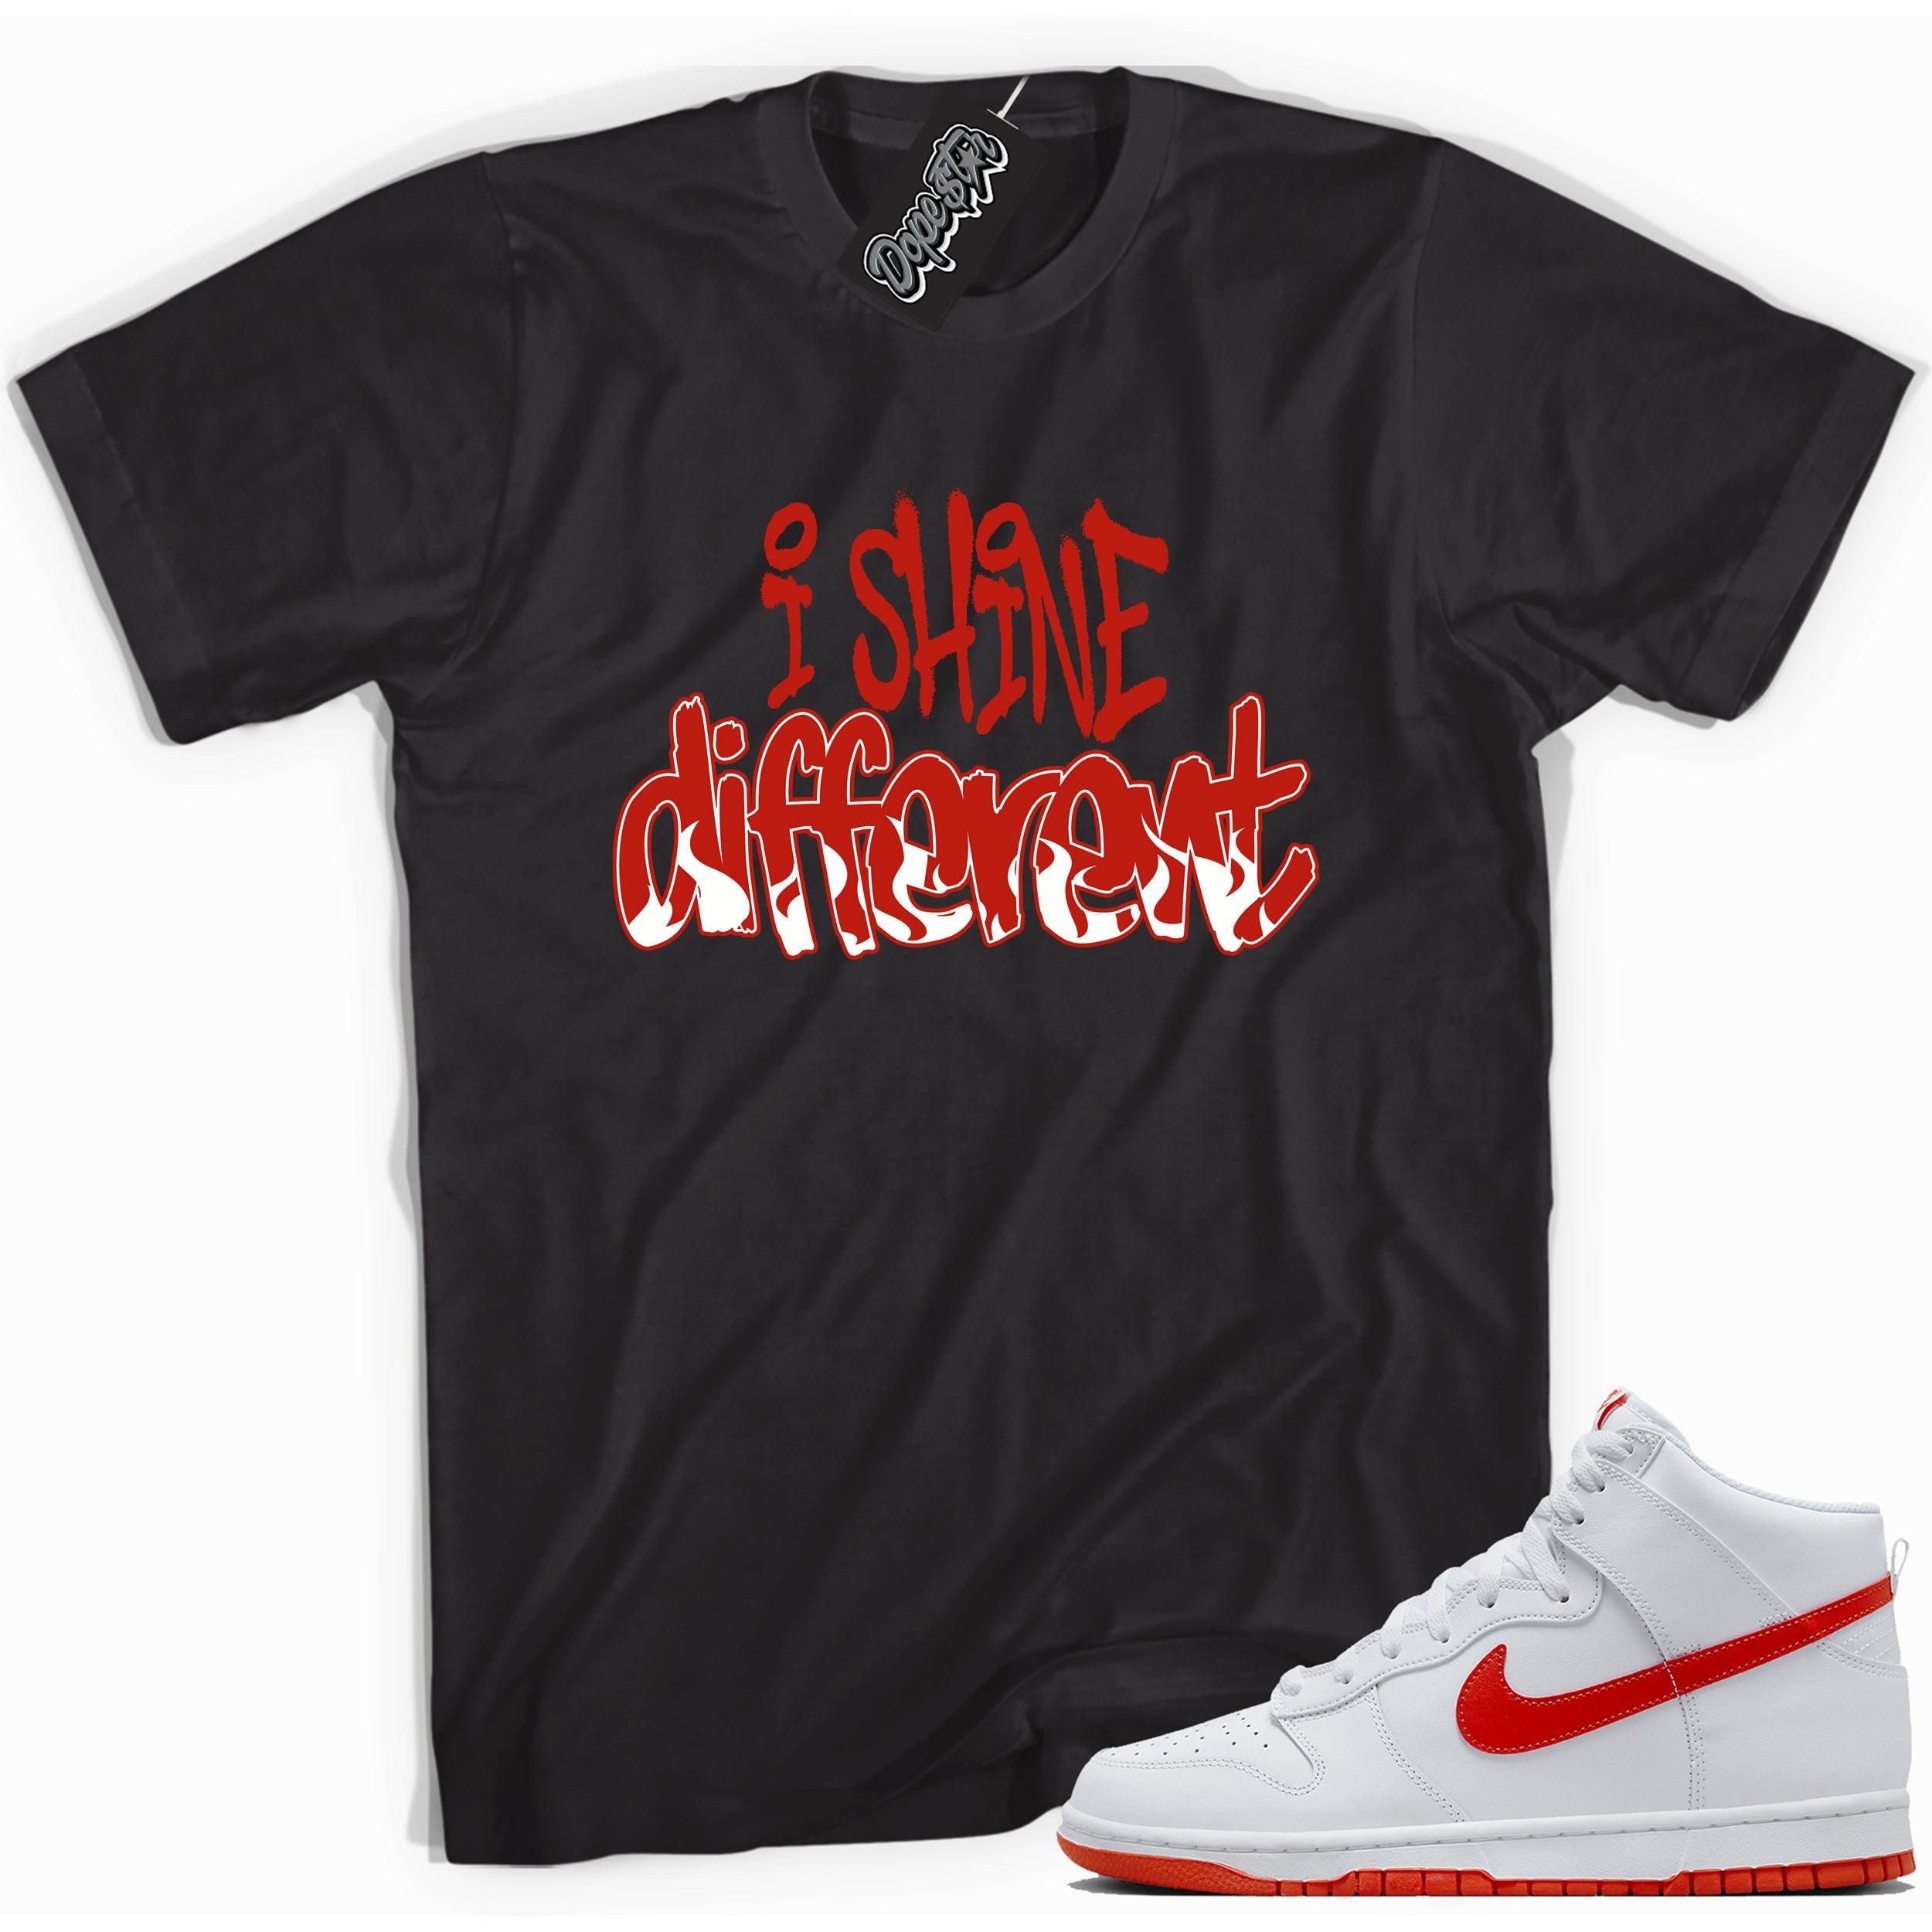 Cool black graphic tee with 'i shine different' print, that perfectly matches Nike Dunk High White Picante Red sneakers.